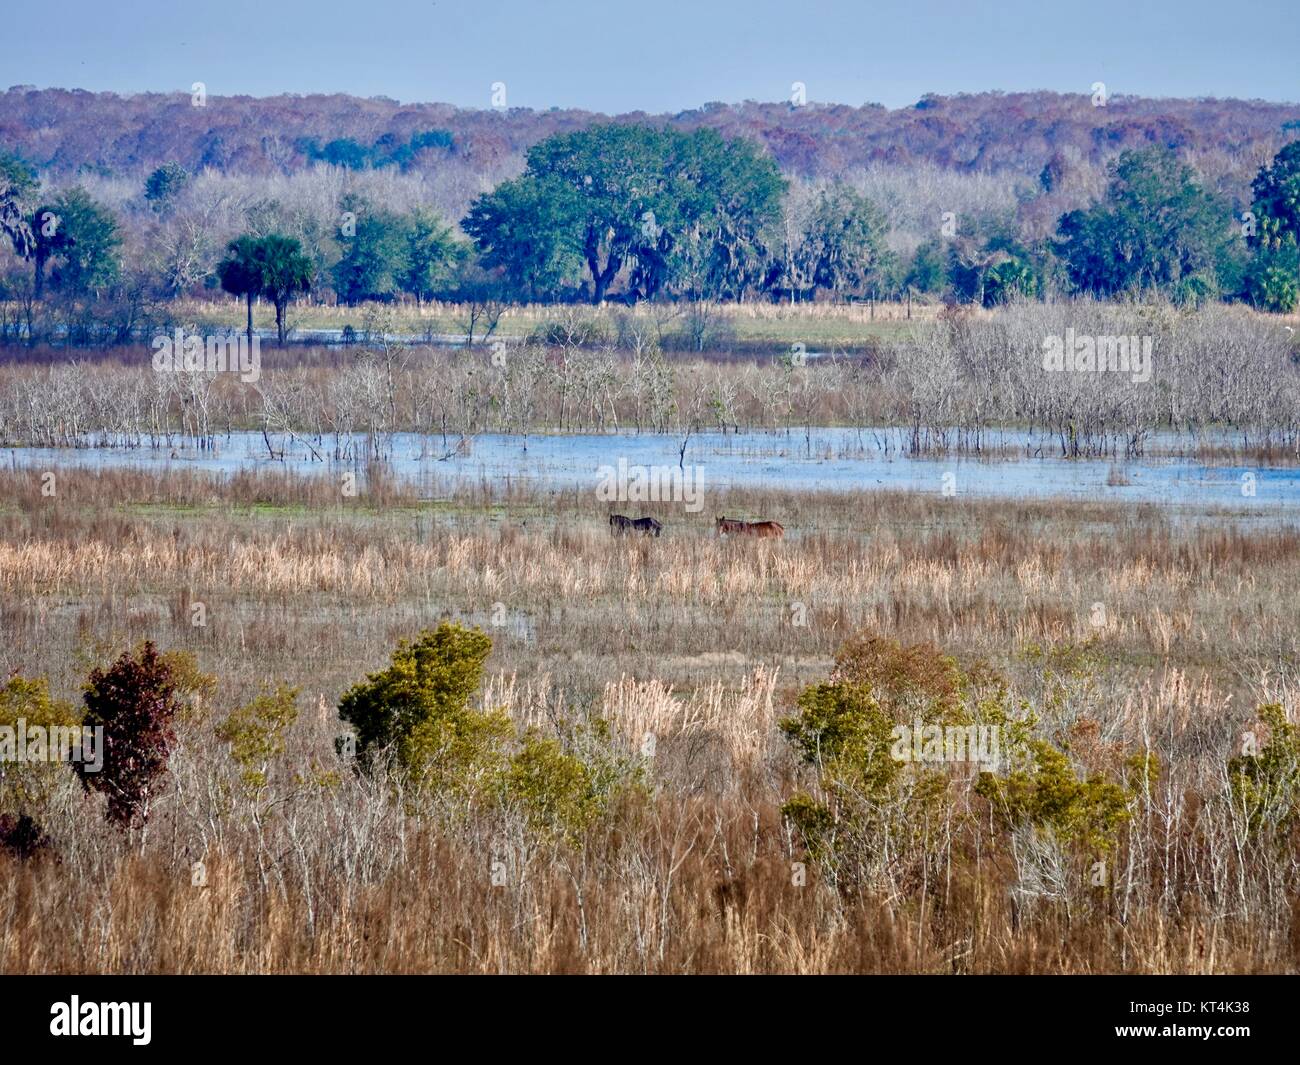 Wild, reral, horses in distance, Paynes Prairie Preserve State Park, Micanopy,Florida, USA. Stock Photo